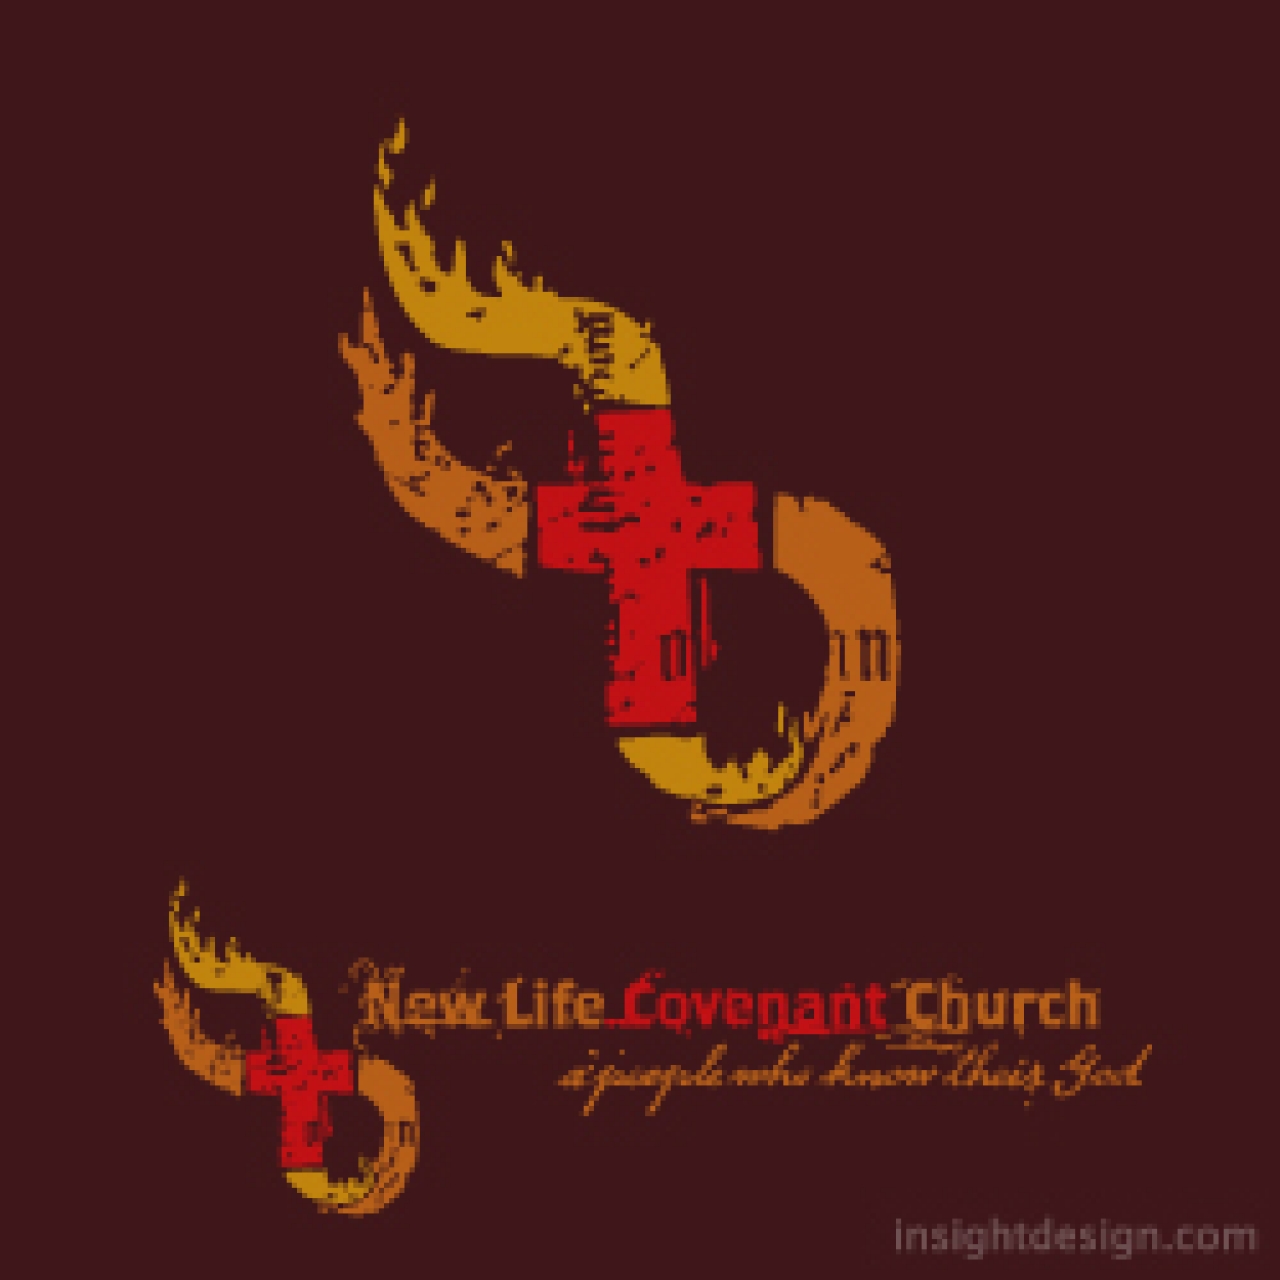 New Life Covenent Church Logo Design is the infinity symbol and the Cross combined.